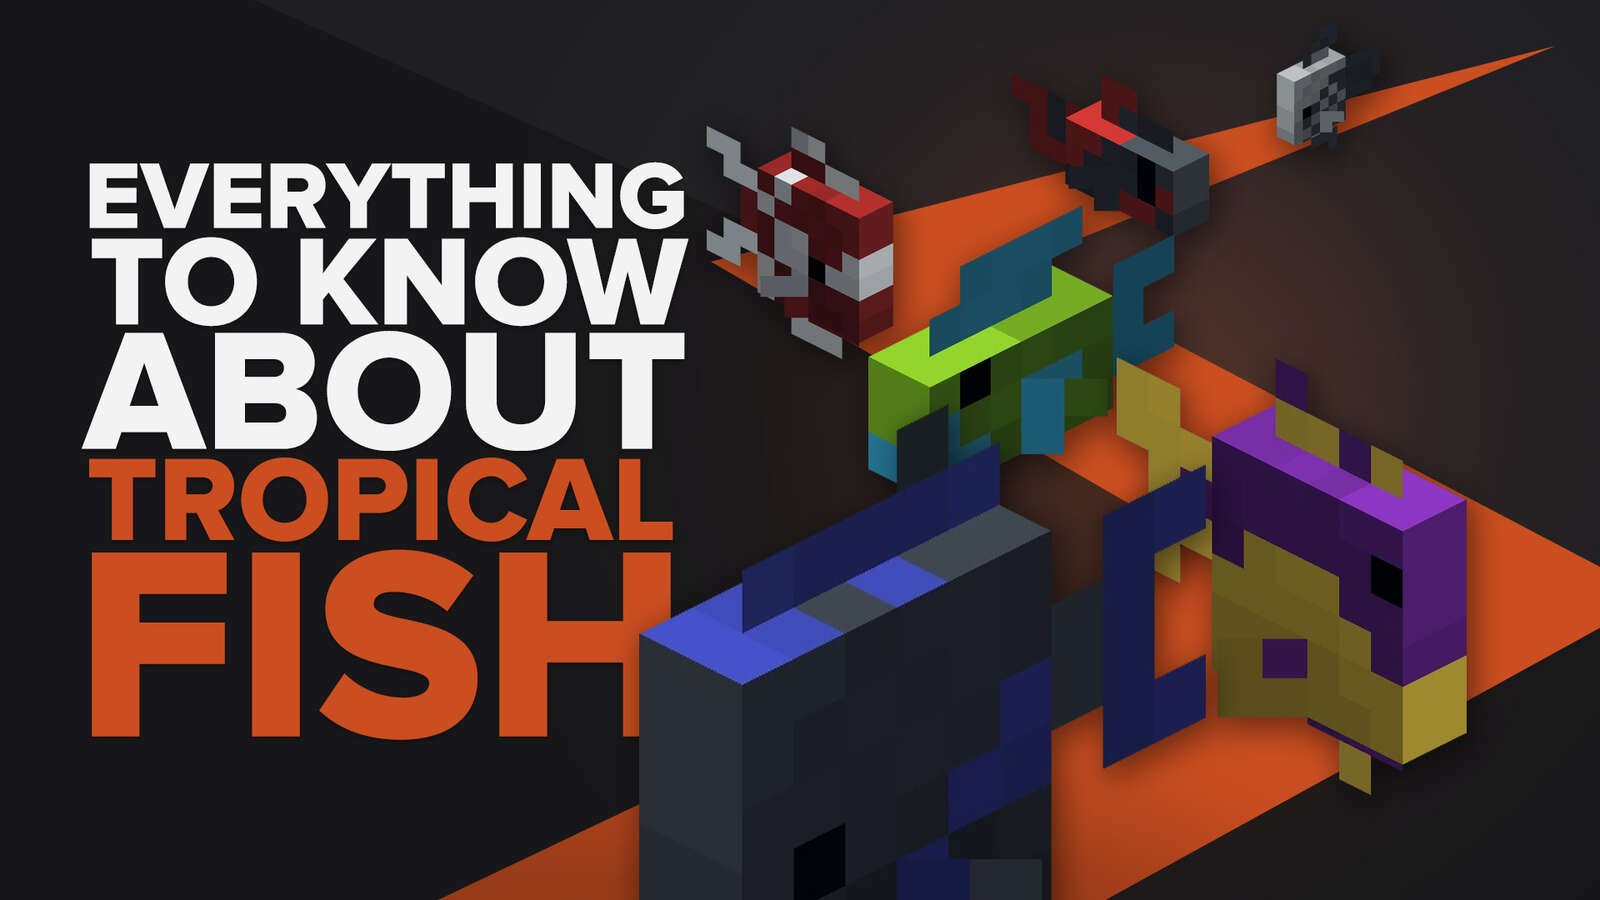 Everything You Need To Know About Tropical Fish Minecraft